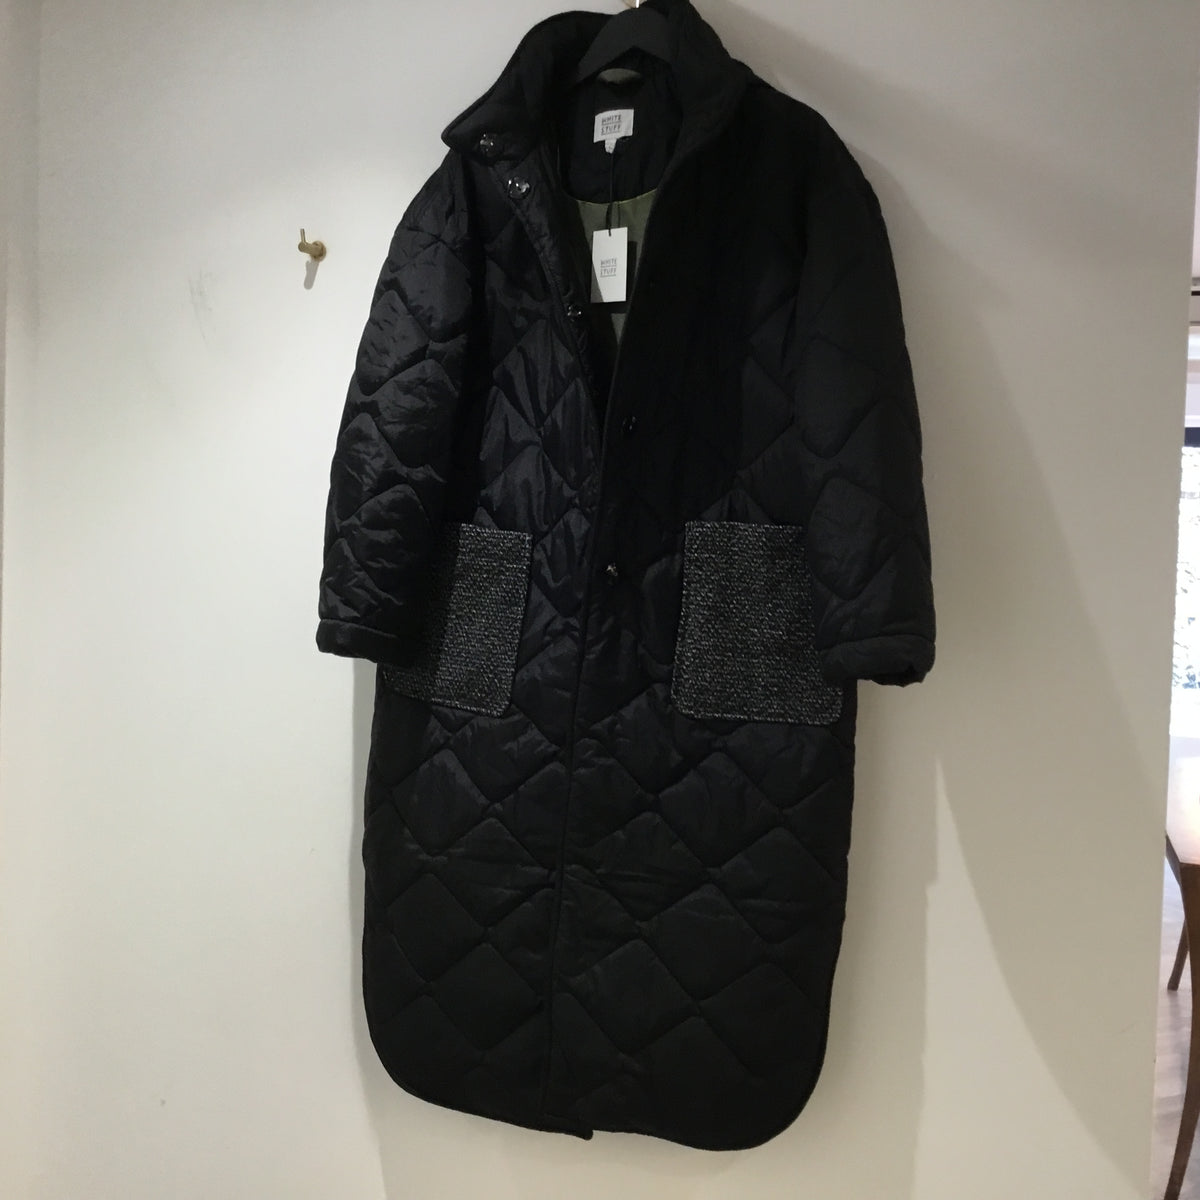 White Stuff 'Luna' fabric mix quilted coat Black Size 12